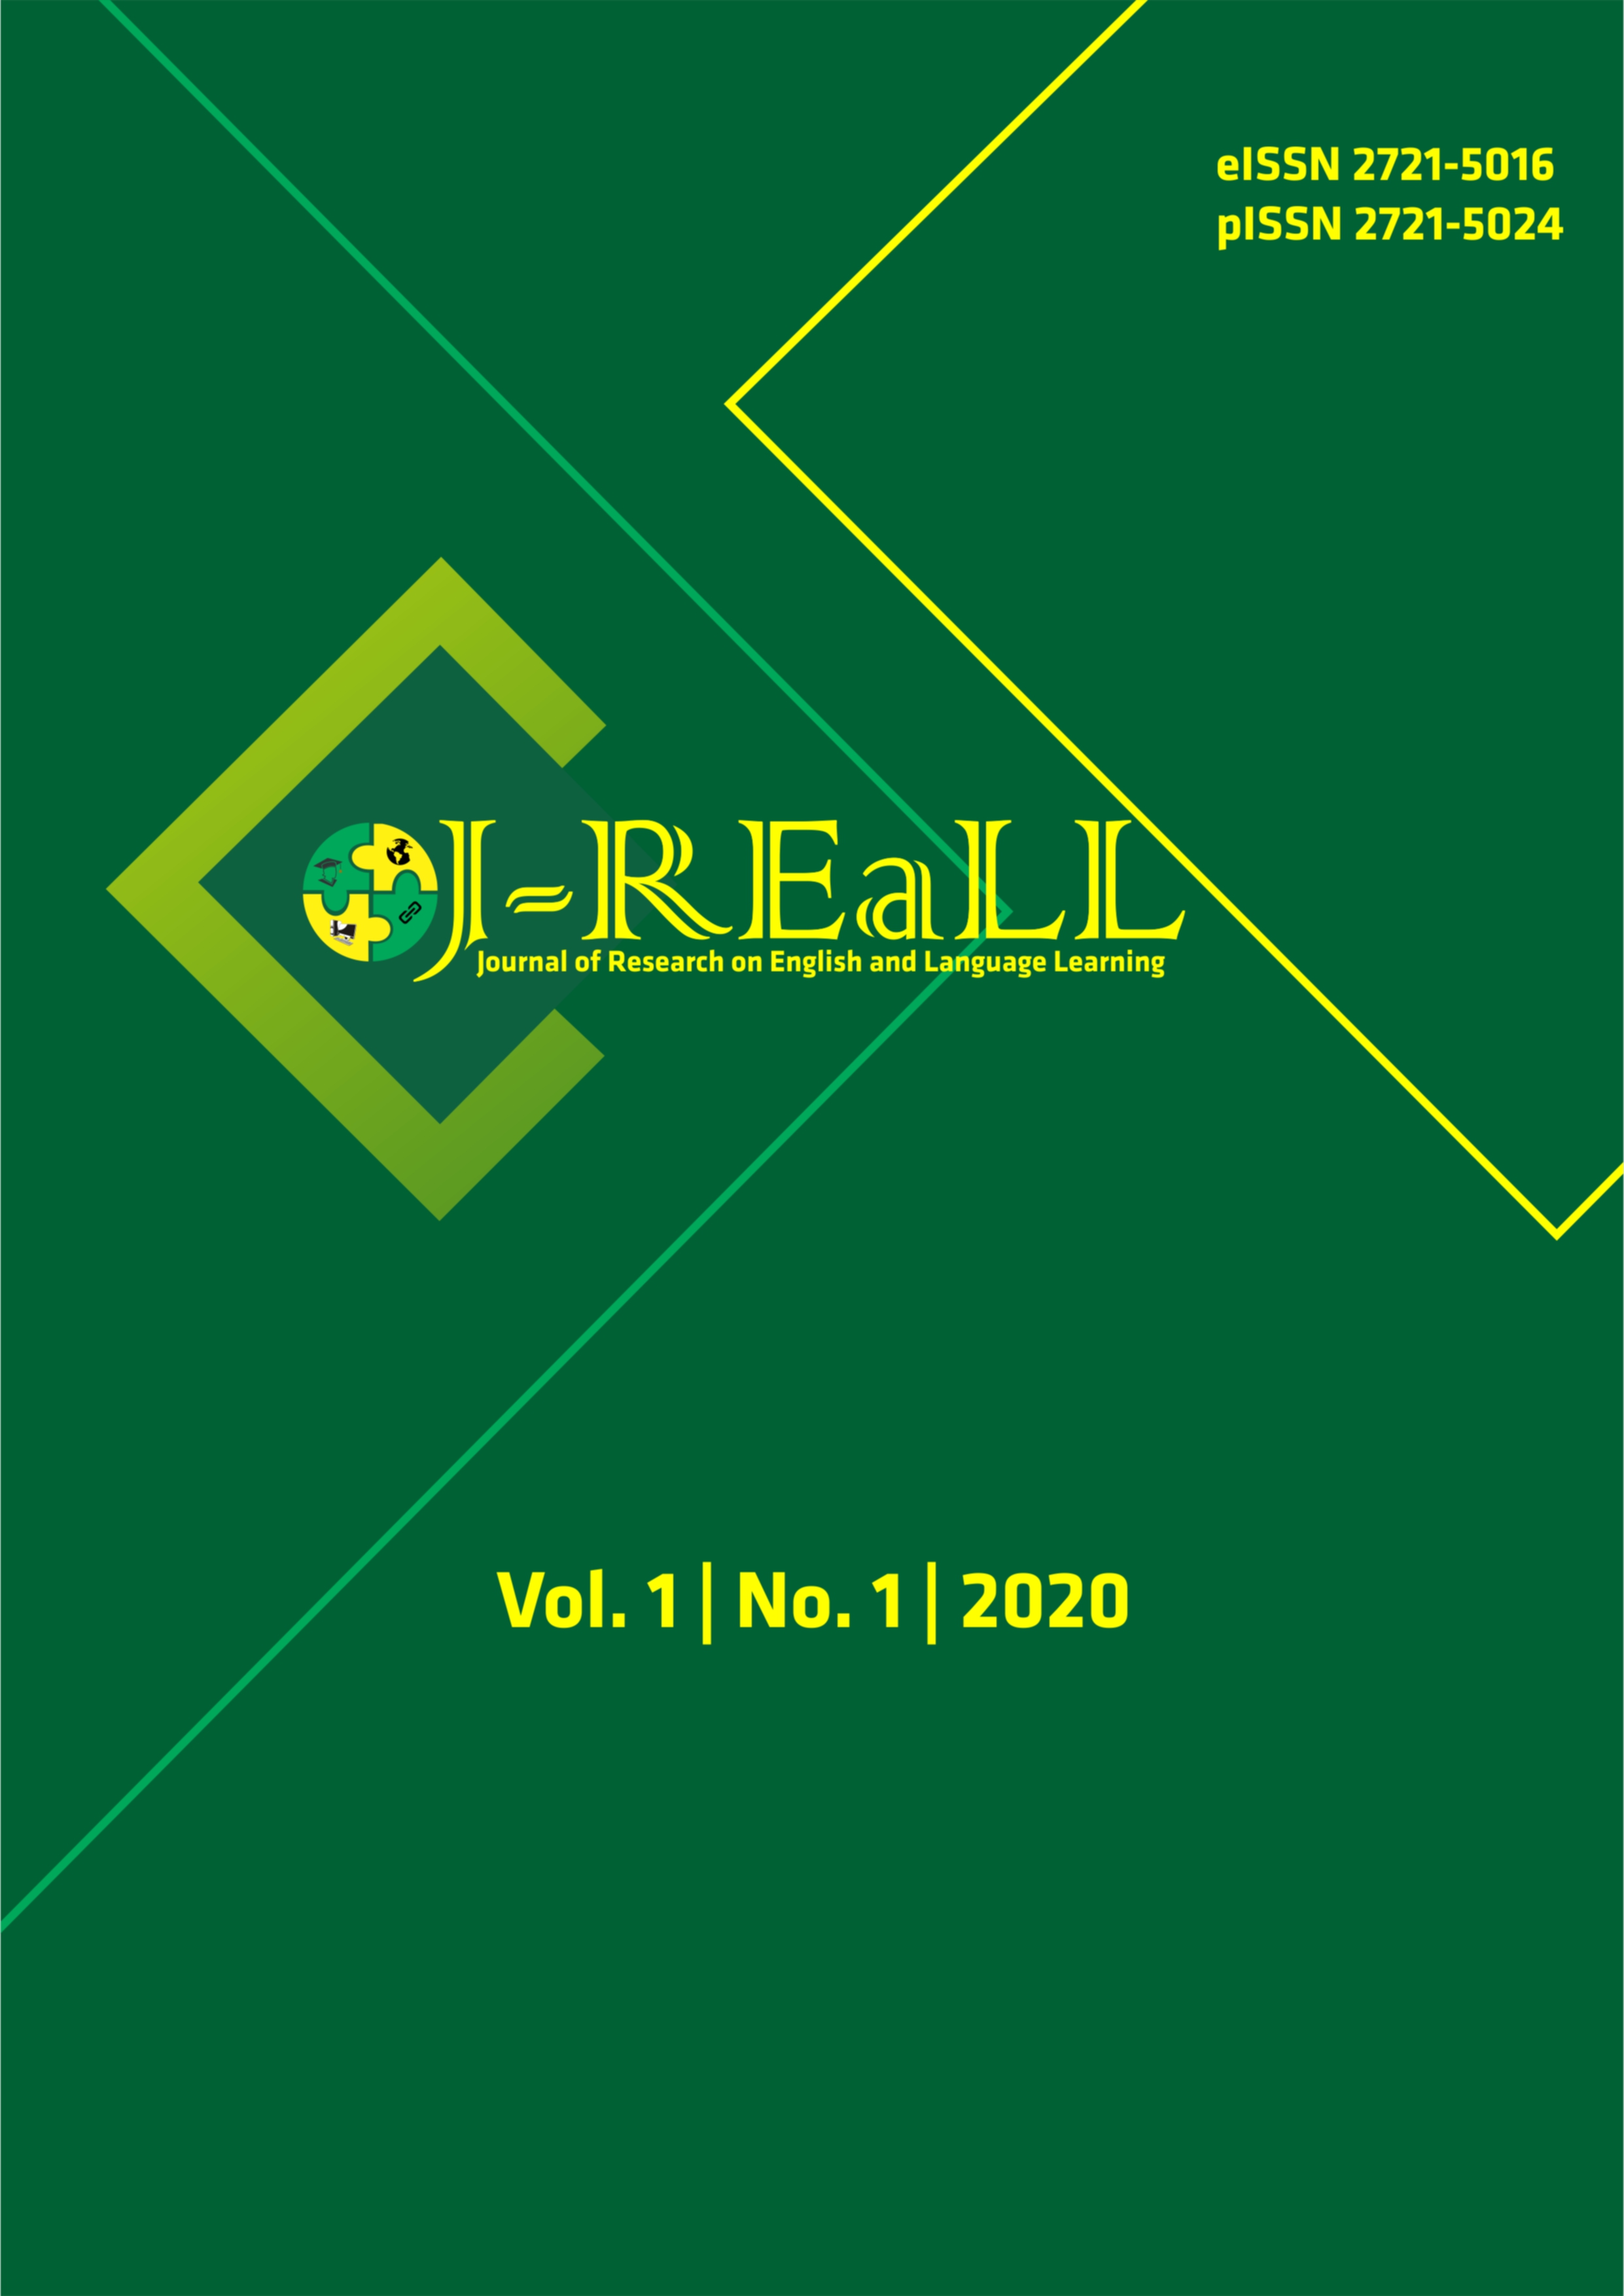 					View Vol. 1 No. 1 (2020): Journal of Research on English and Language Learning (J-REaLL)
				